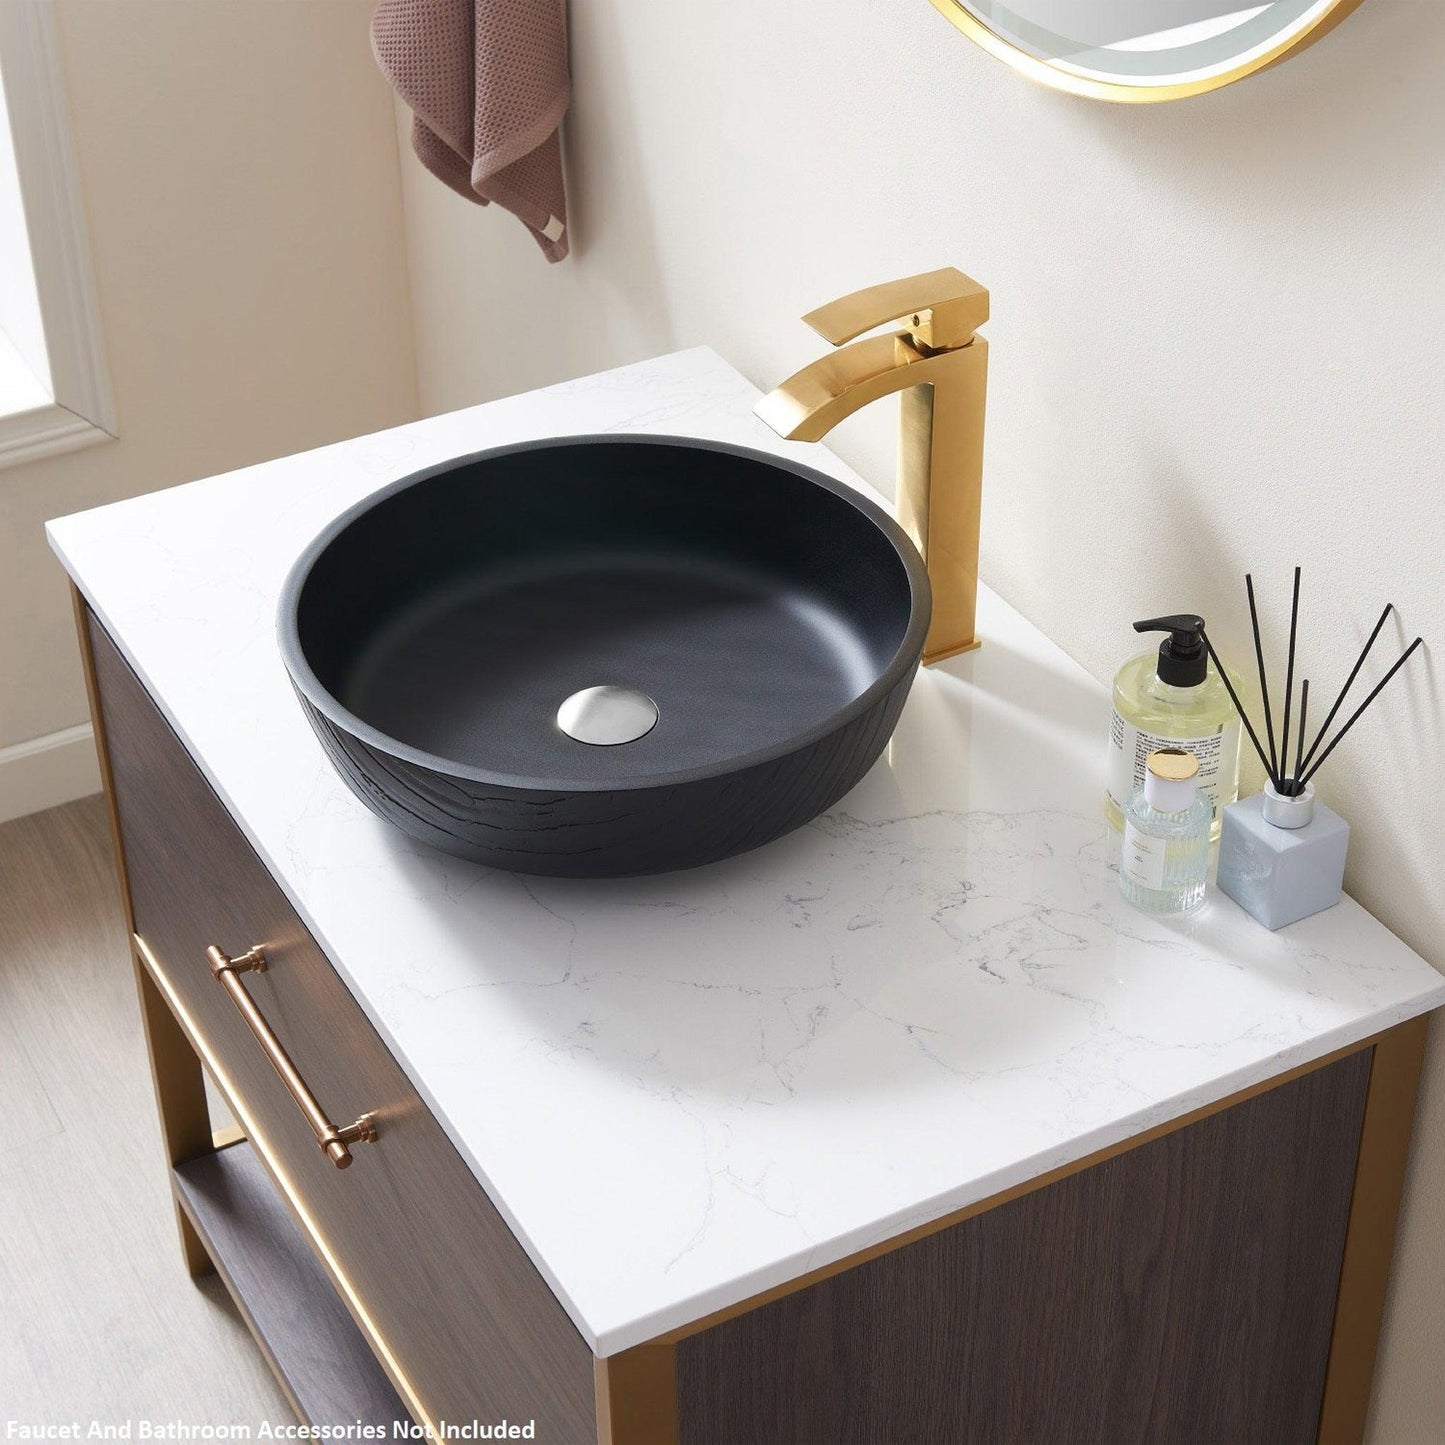 Vinnova Ferrol 17" Matte Black Circular Tempered Glass Painted by Hand Vessel Bathroom Sink Without Faucet